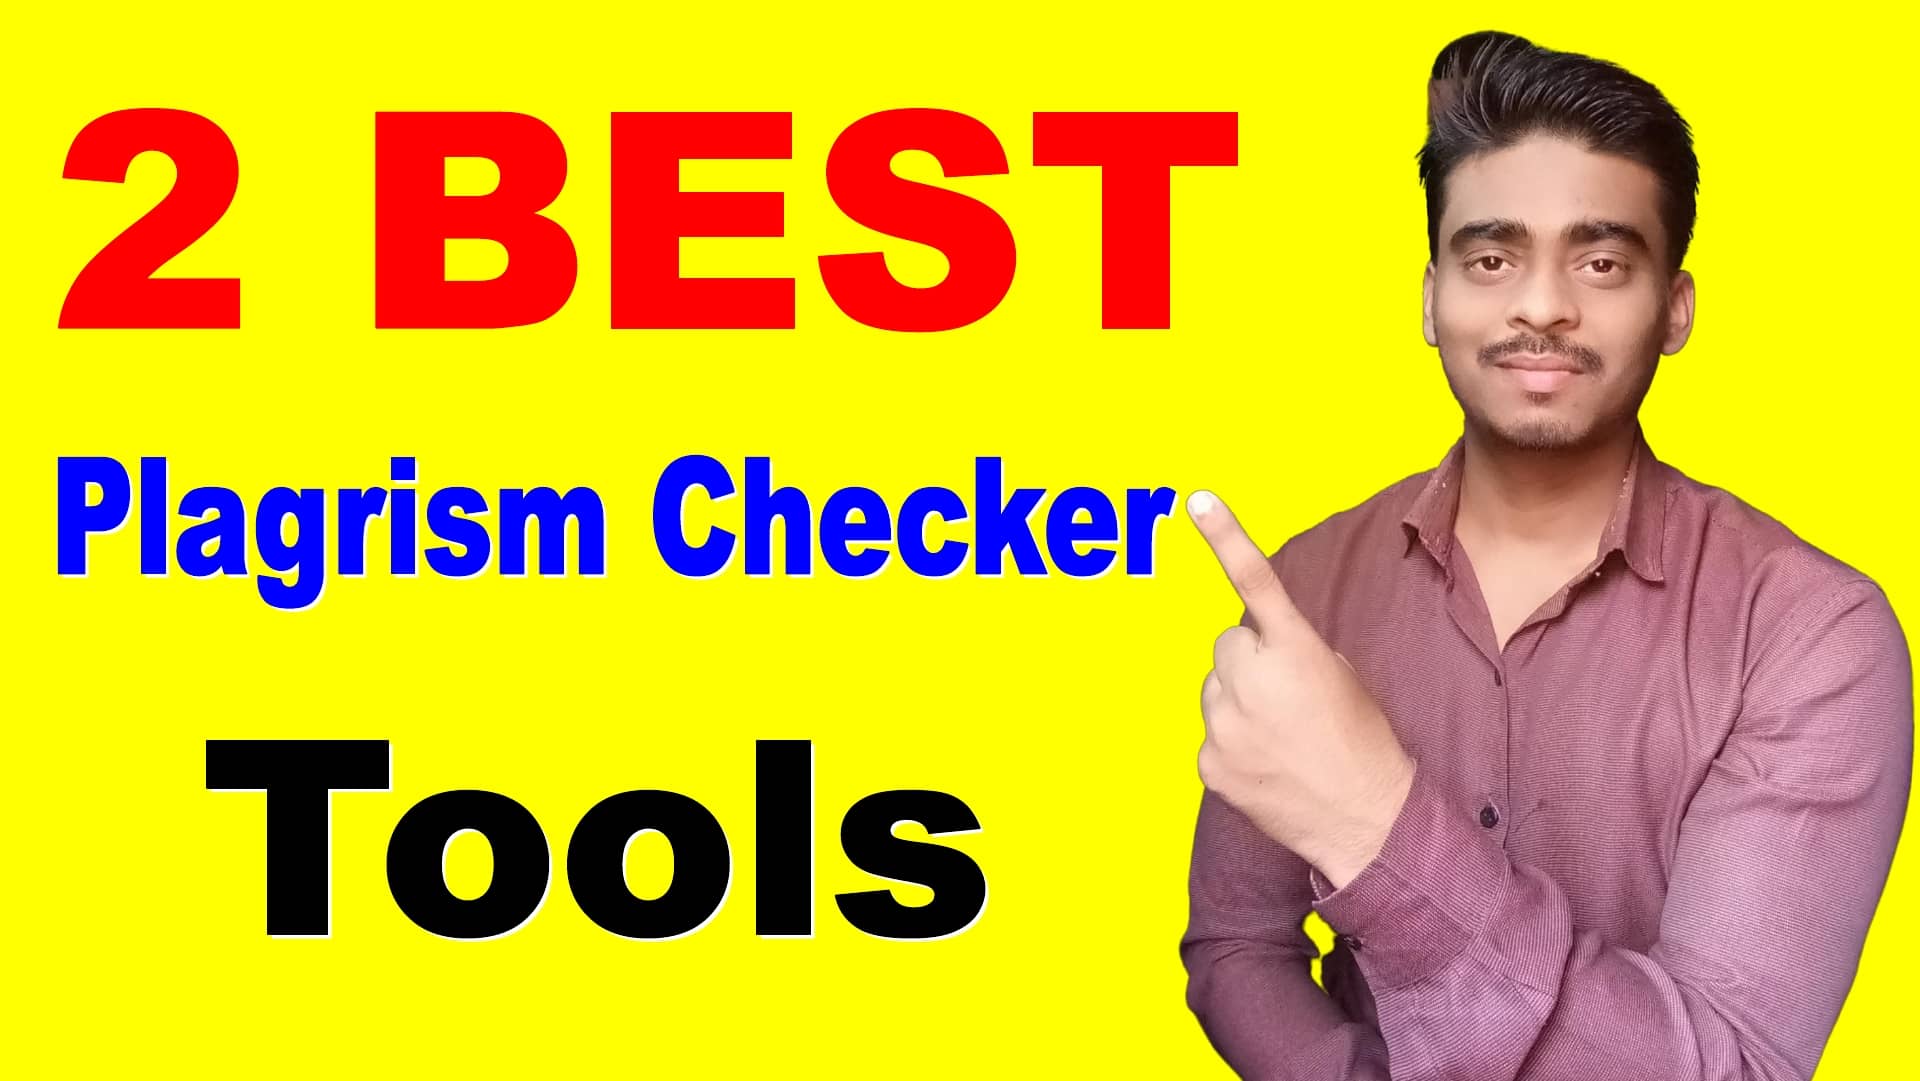 Best plagiarism checker tools for blog website | Free Plagiarism checker